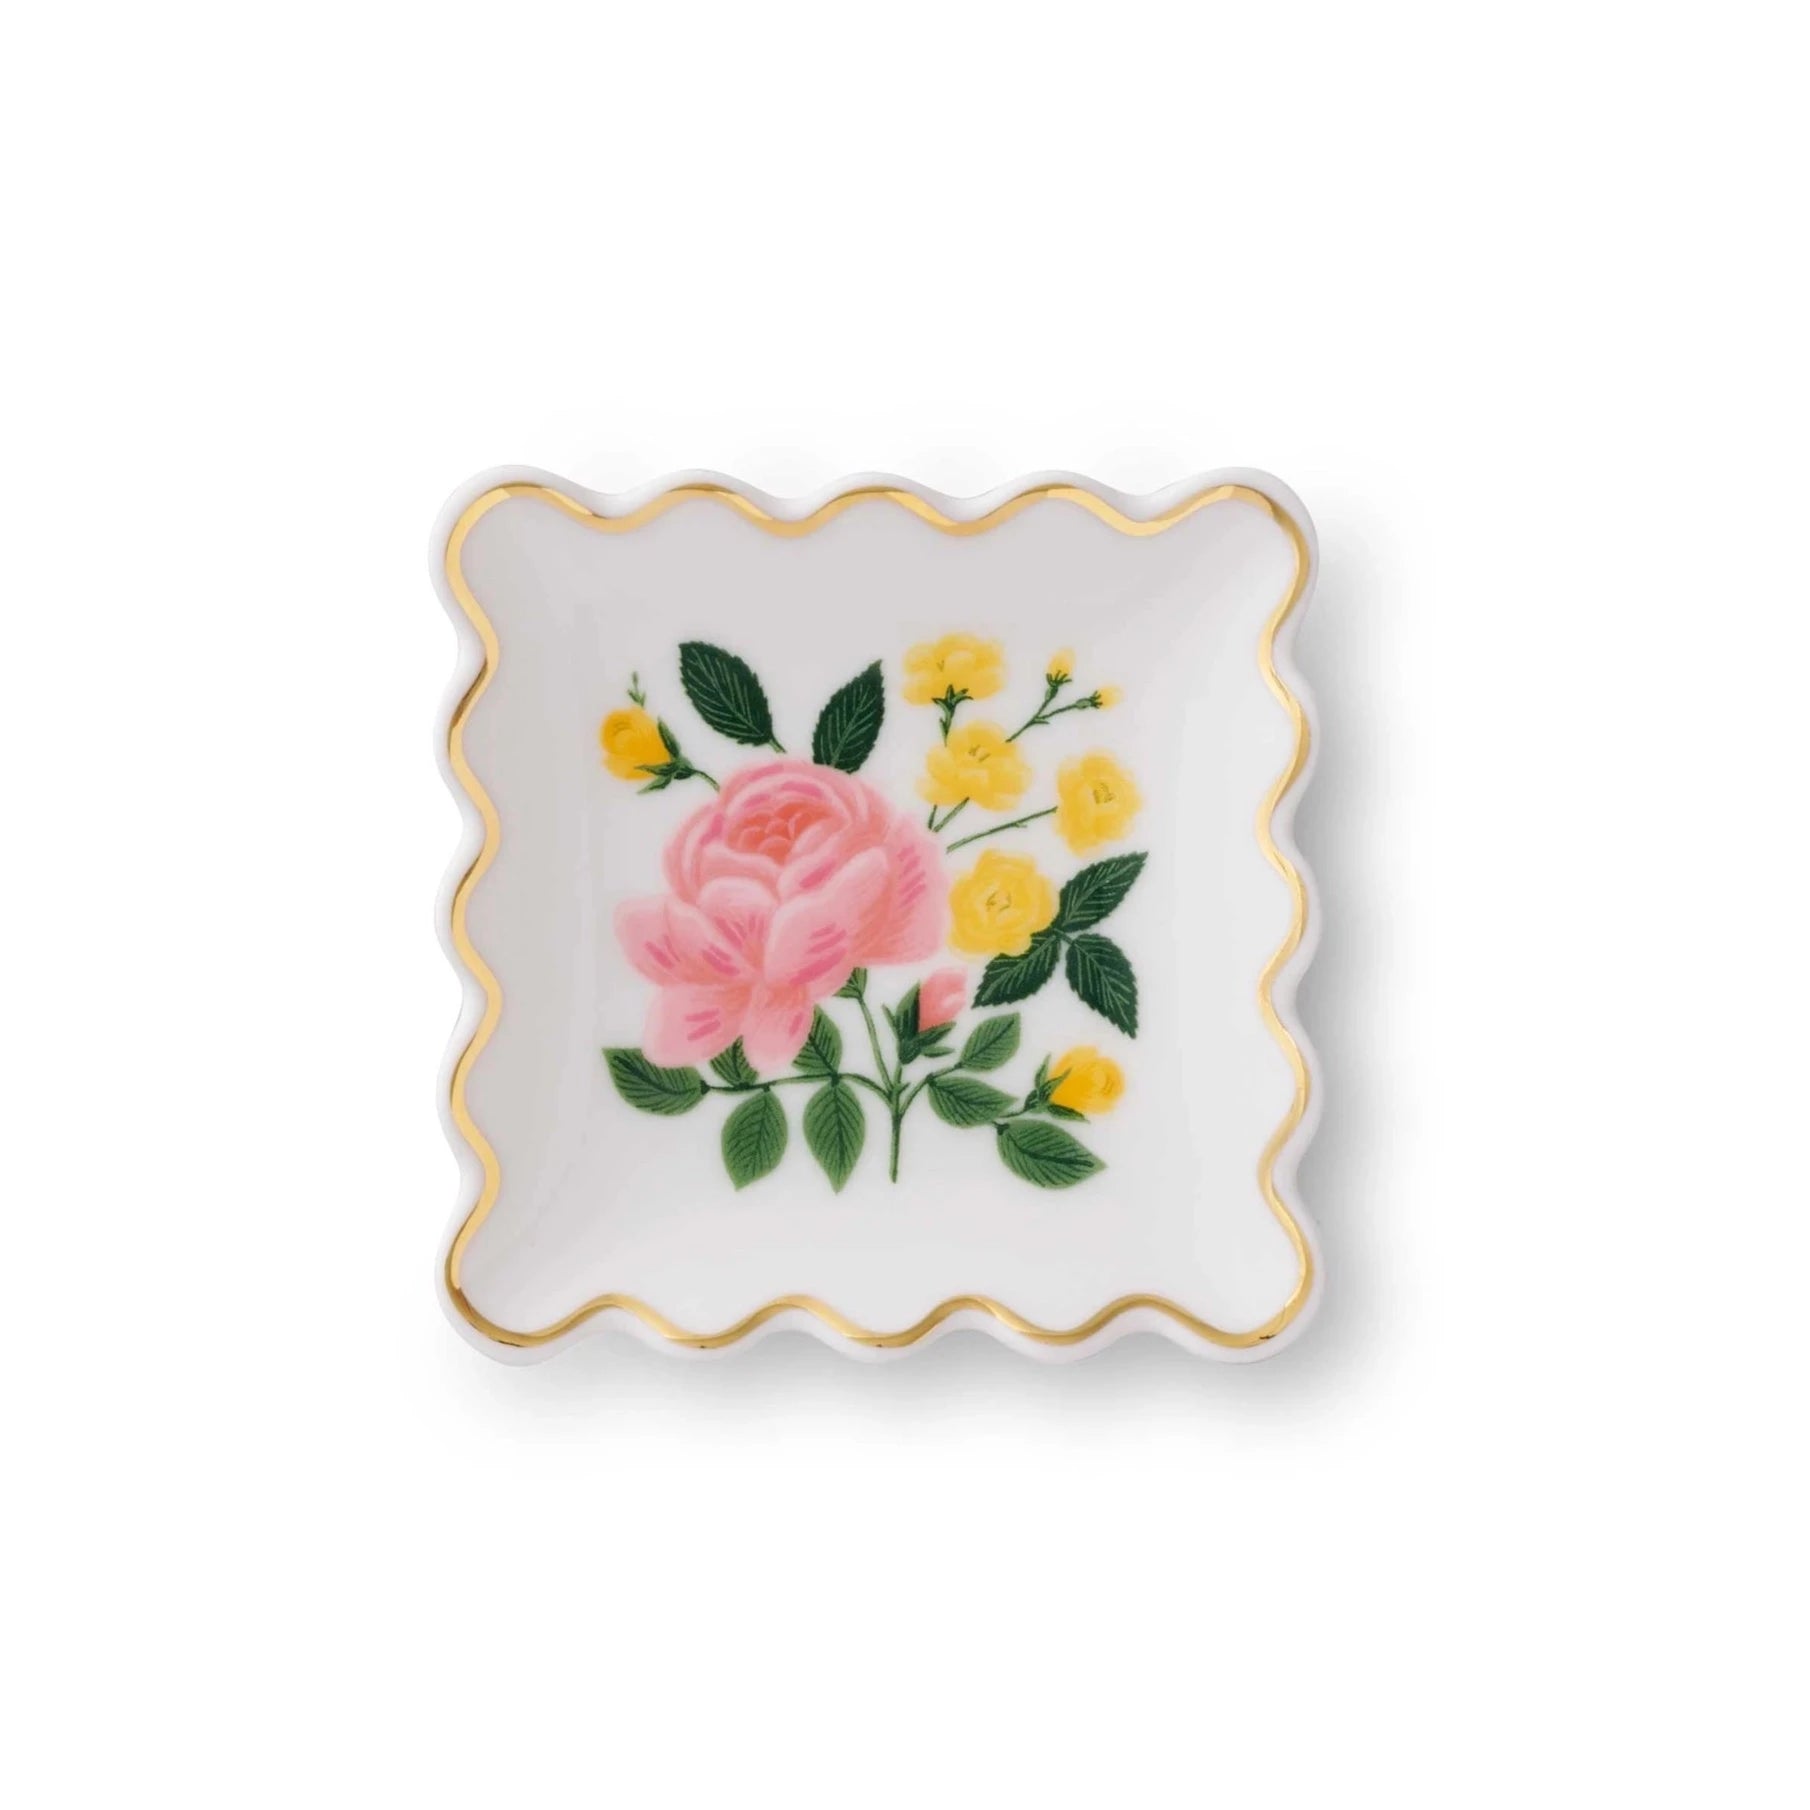 white rectangular ring dish with scalloped edges. in the center is a rose 